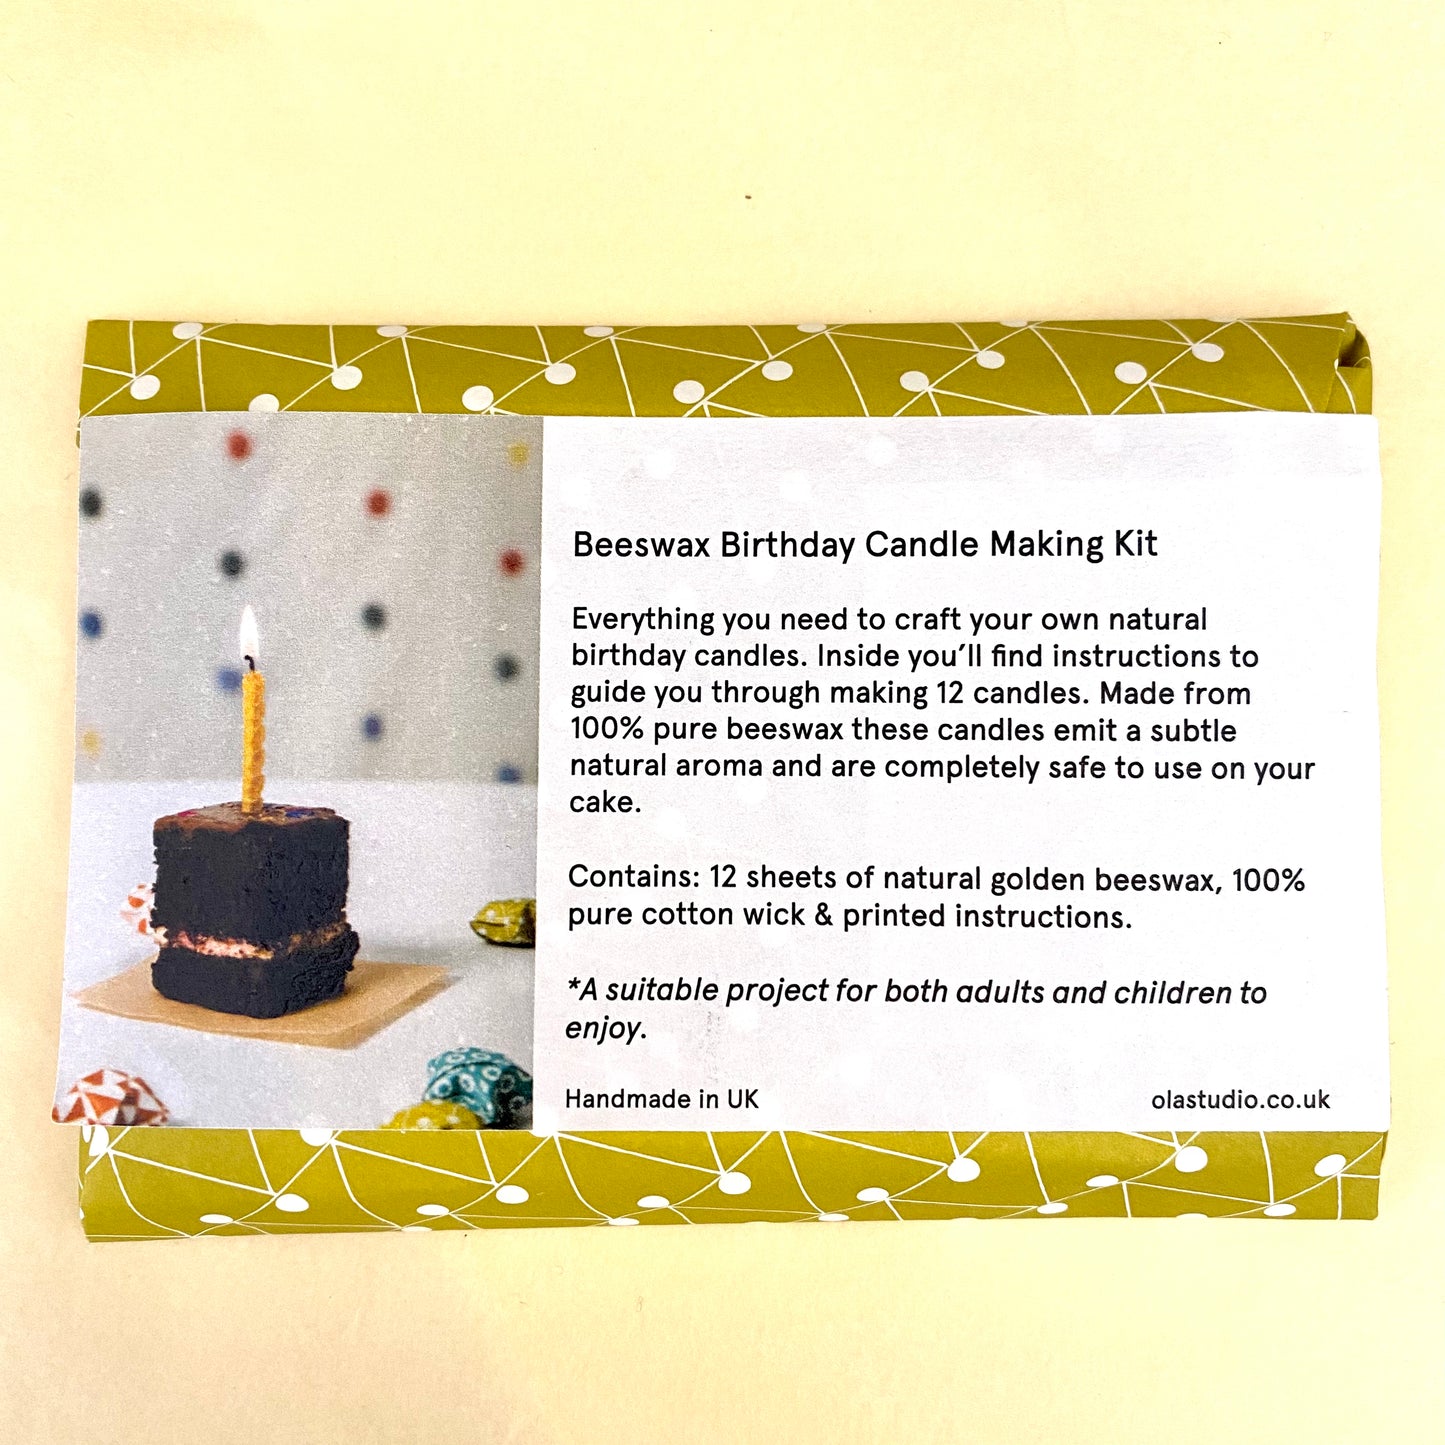 Beeswax Birthday Candle Making Kit